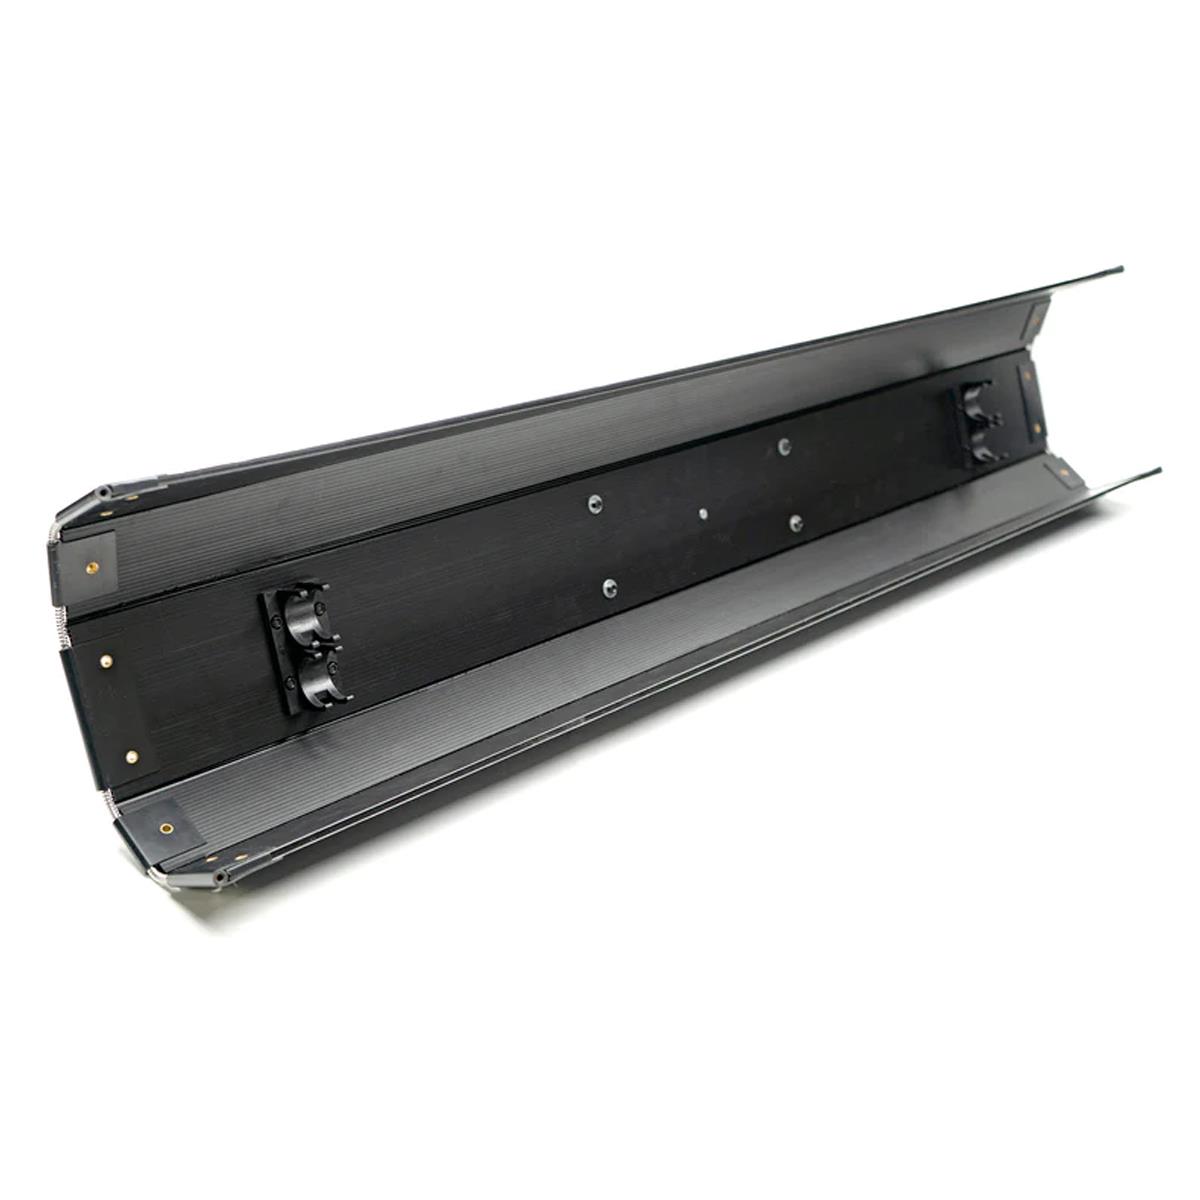 Image of SGC Lights PS402 Poly Shell Housing for 2x 4' LED Tube Lights